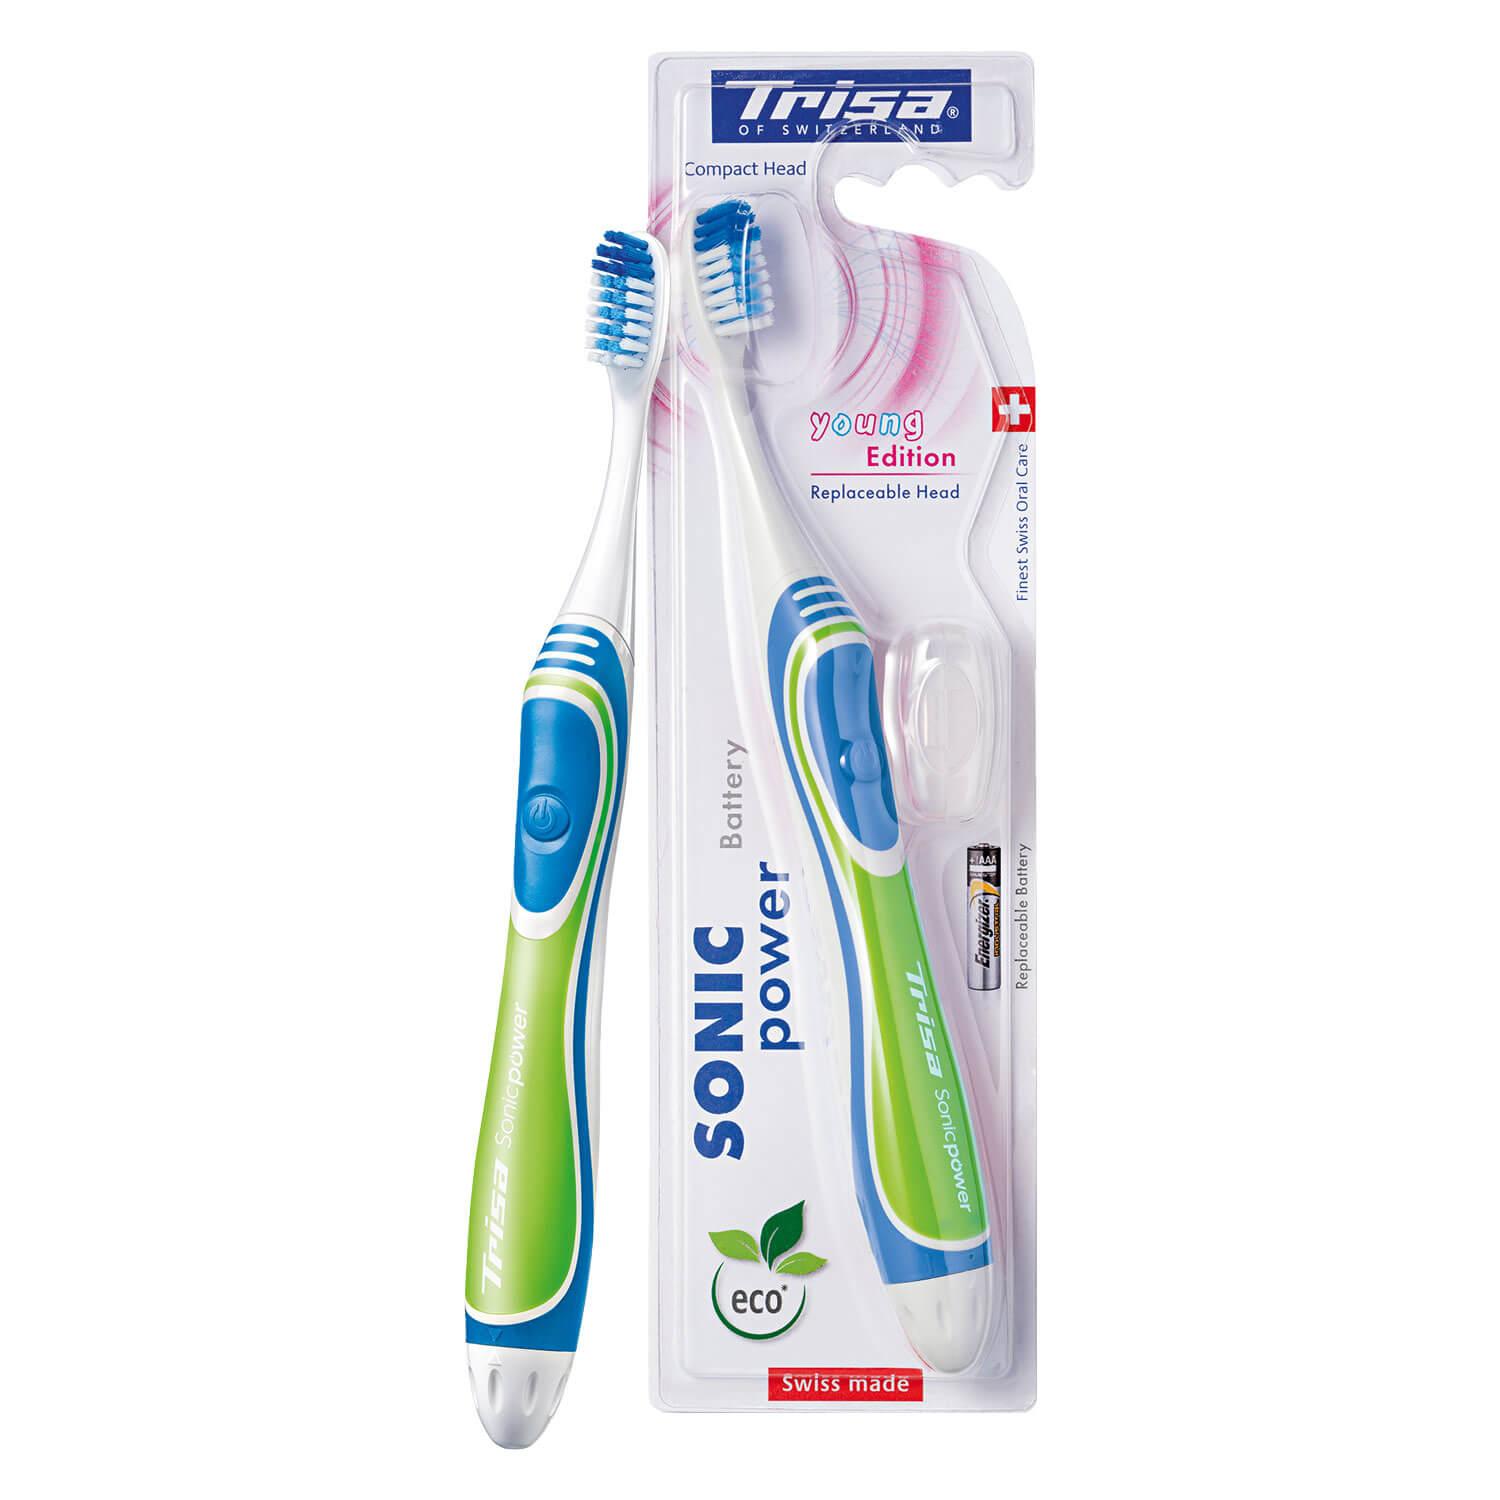 Trisa Oral Care - Sonic Power Battery Young Edition Compact Head